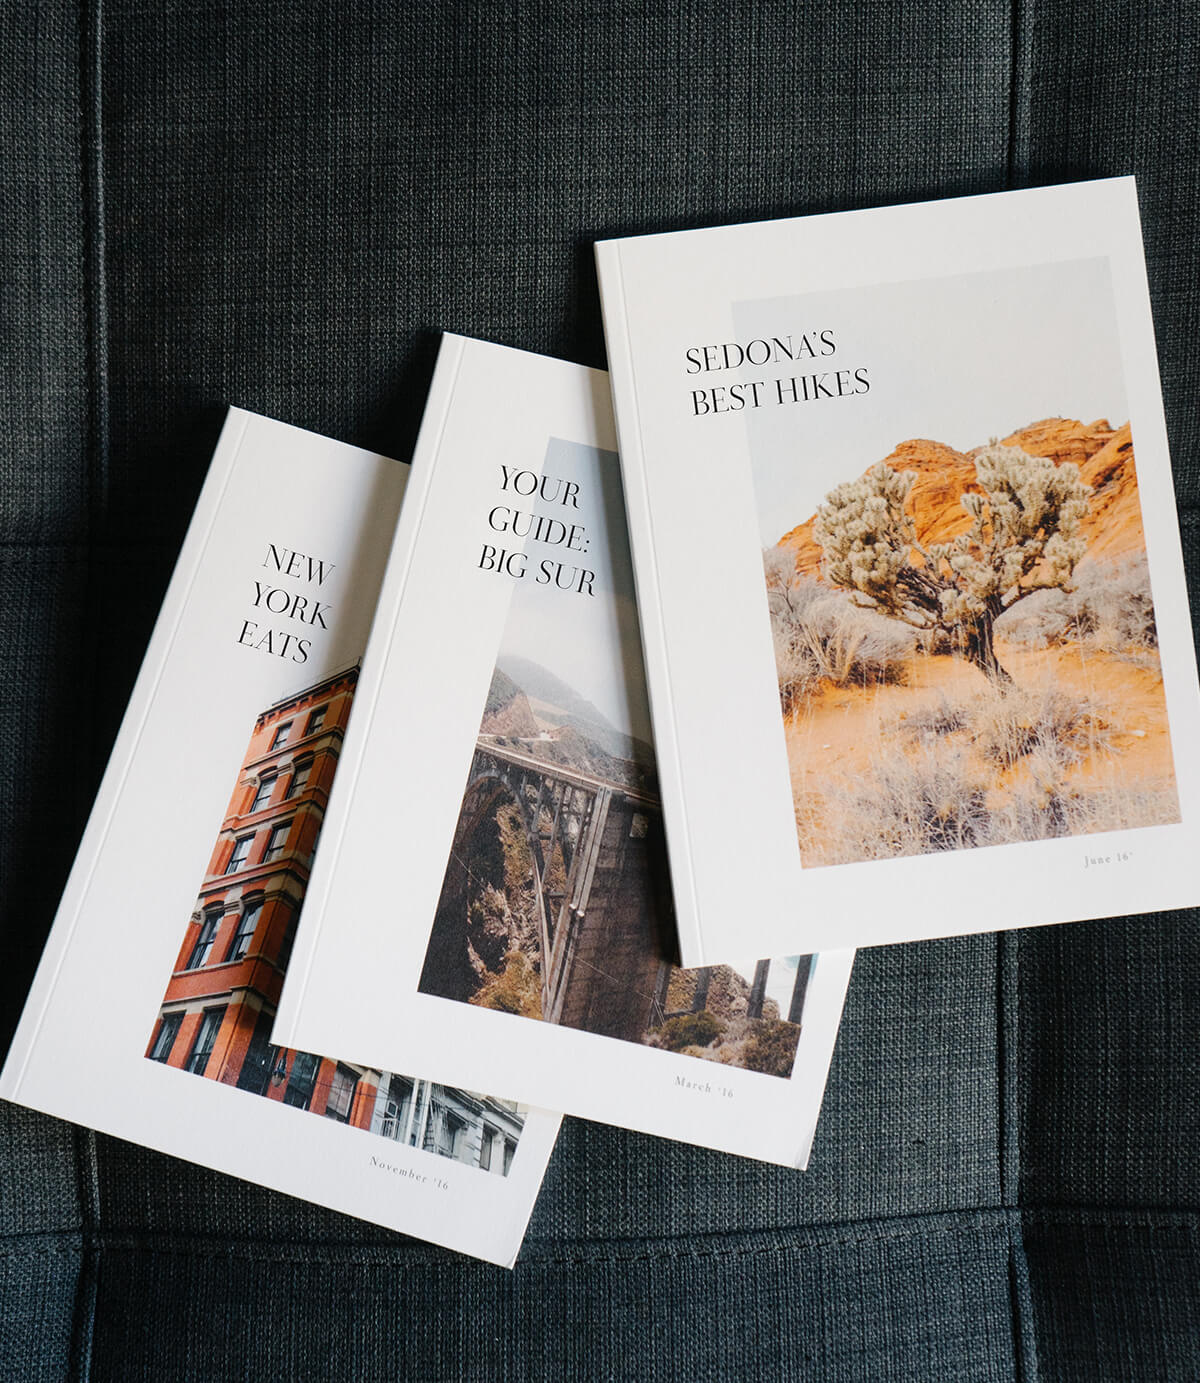 Custom-made city guides printed in softcover photo books